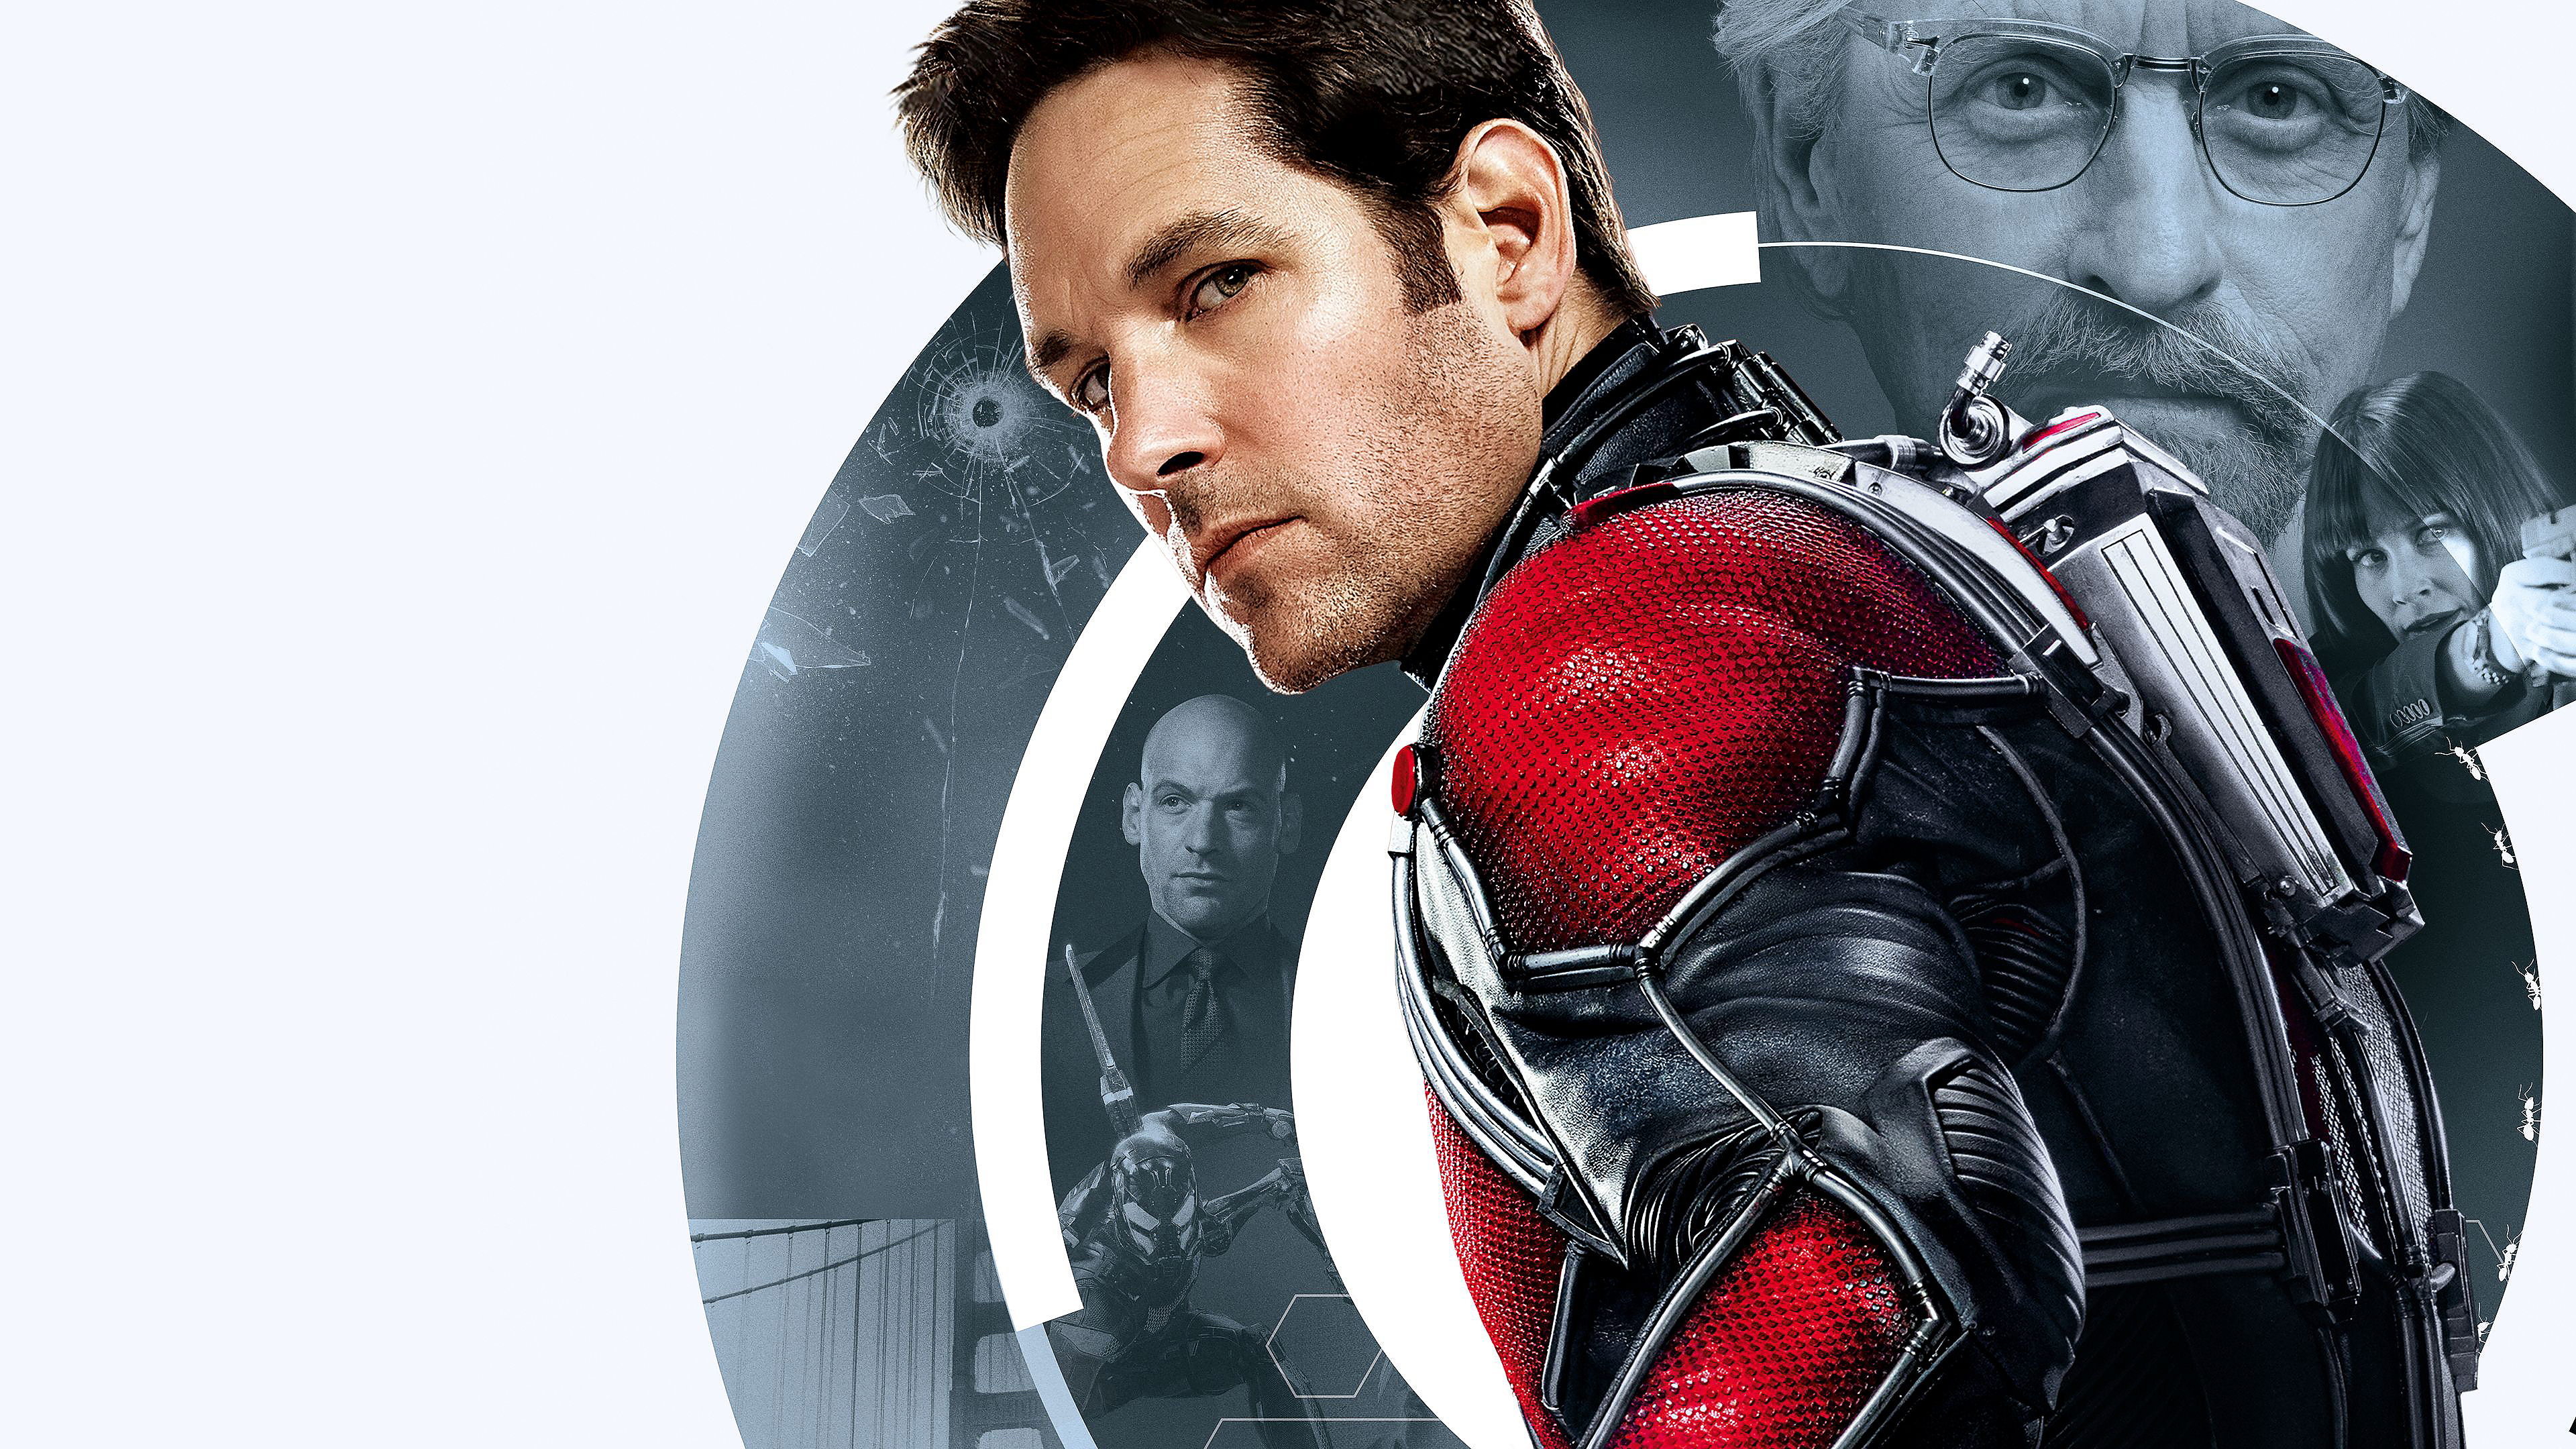 AntMan and the Wasp Wallpapers  HD Wallpapers  ID 24206